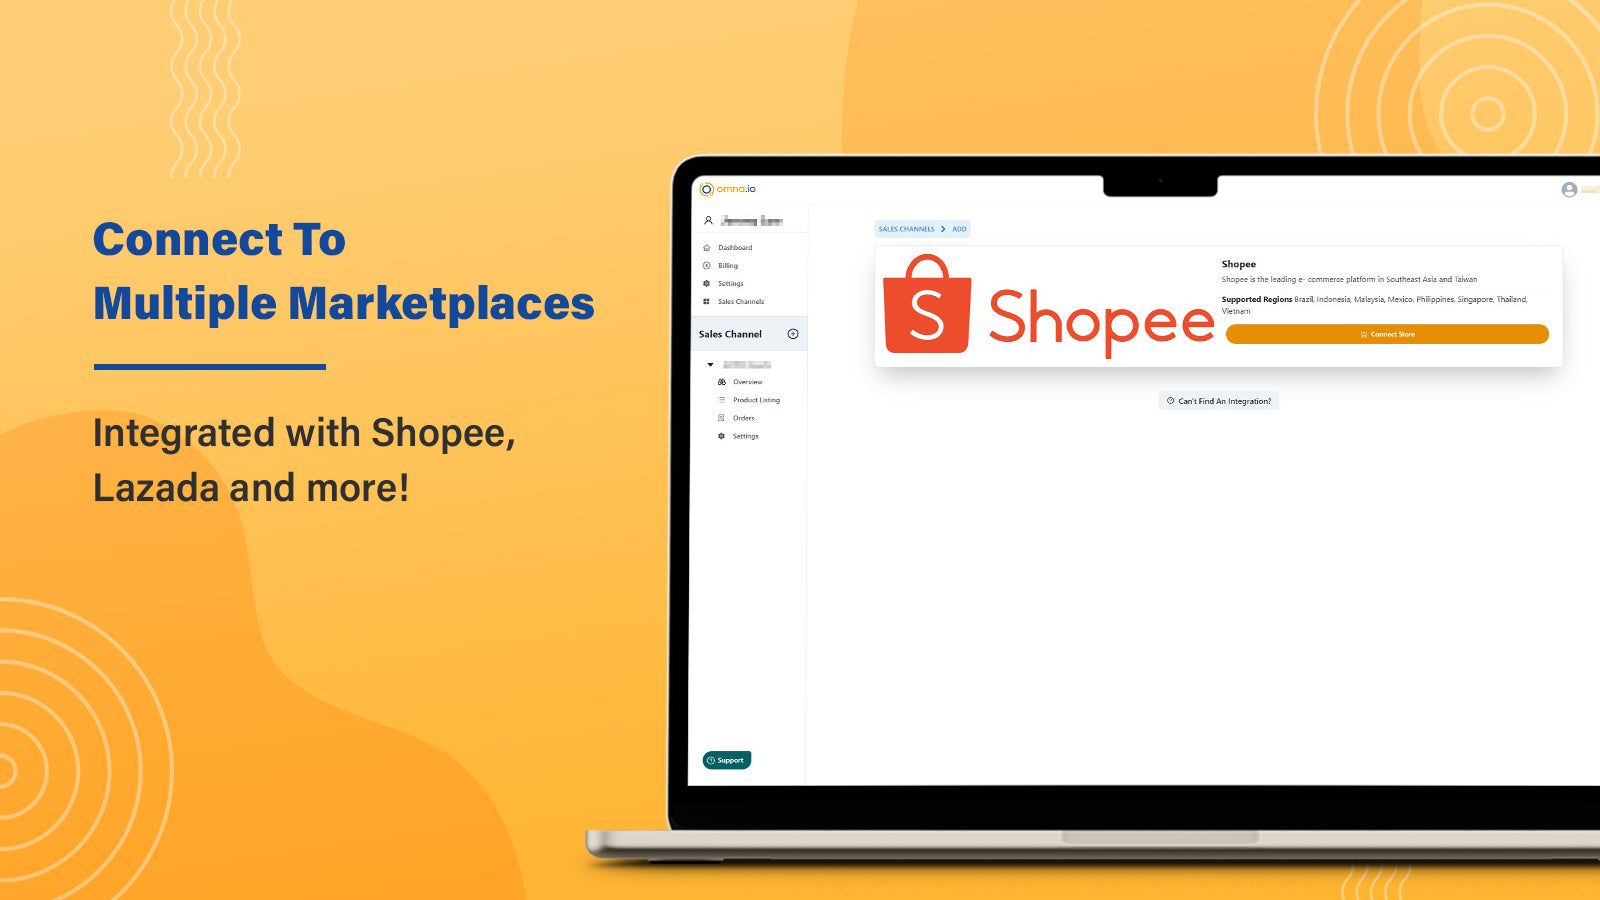 Connect To Multiple Marketplaces